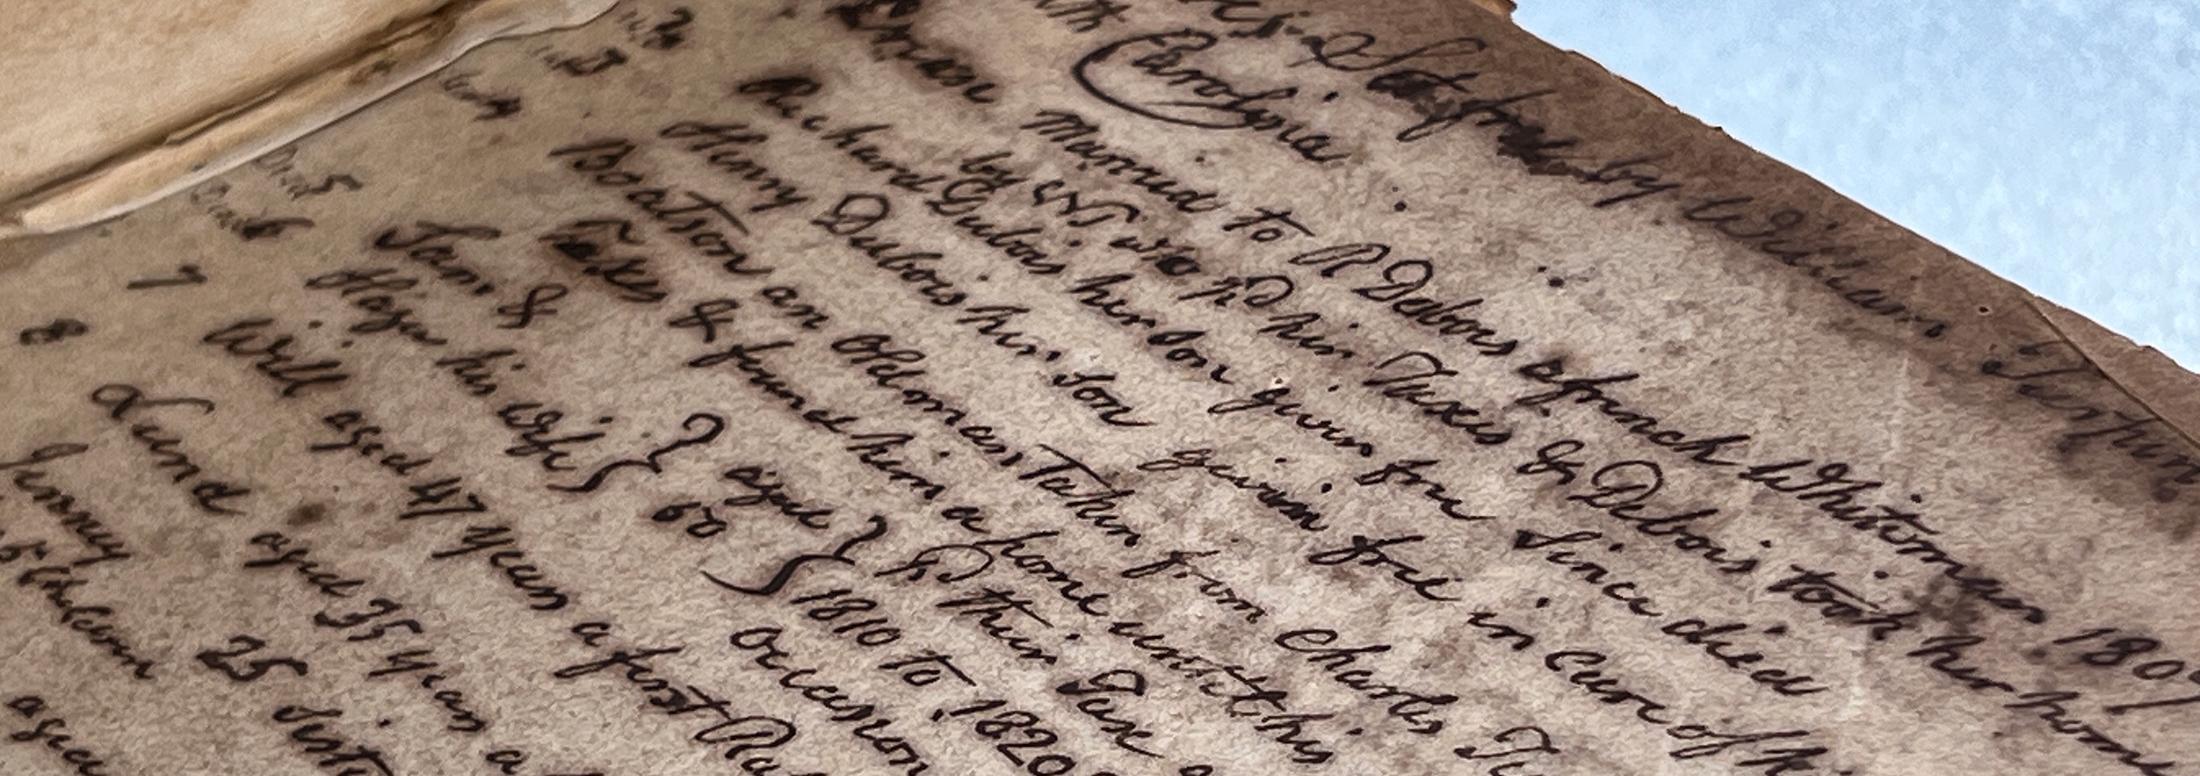 Close up image of an aged, sepia colored page in a book with lines of black handwritten text in cursive script